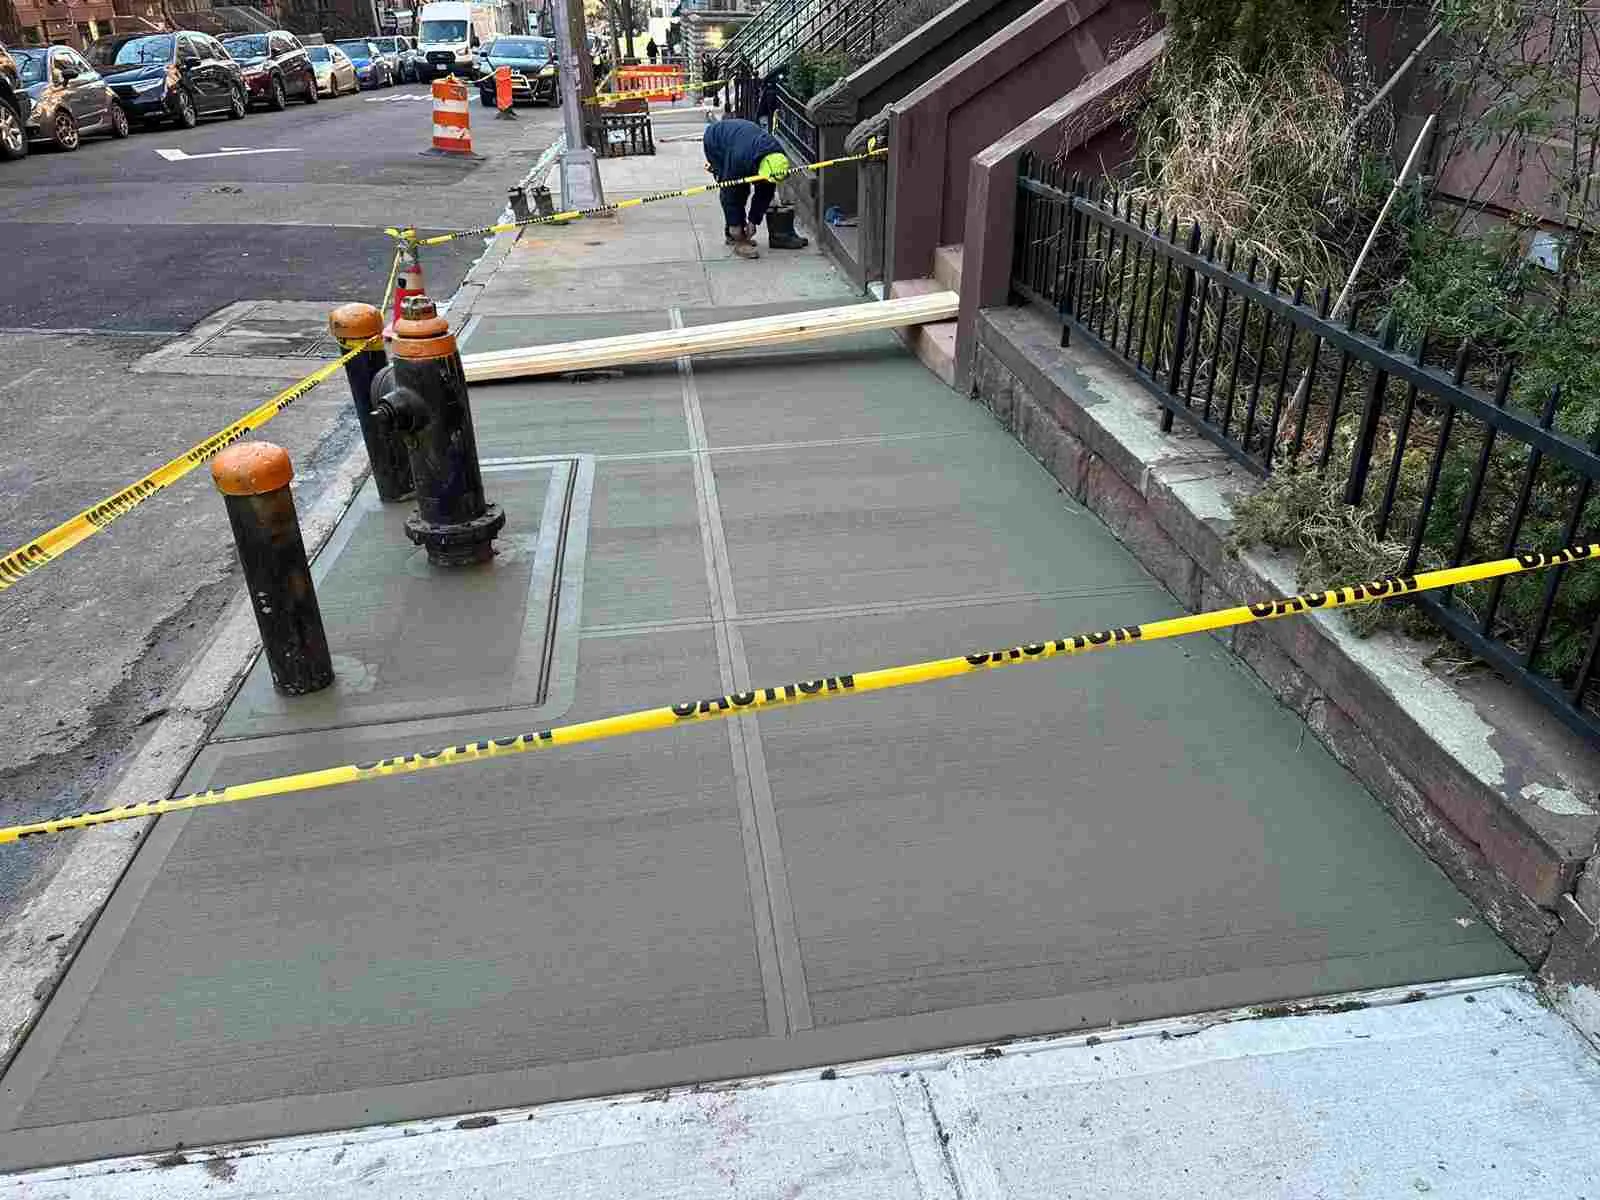 Sidewalk Repair NYC completes a transformative sidewalk repair project for safer and more appealing walkways in the Bronx